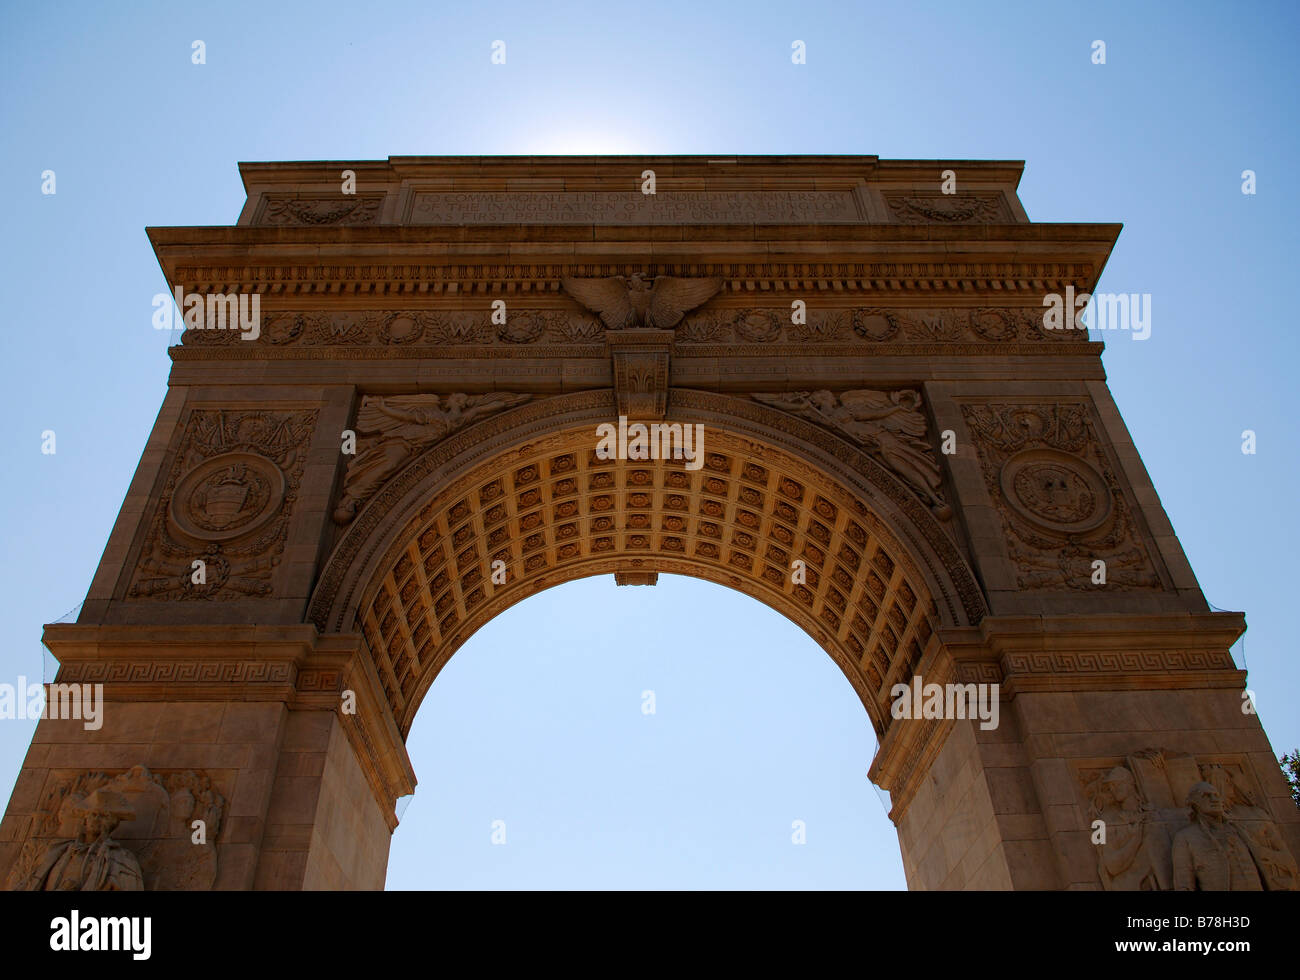 Triumphal arch on Washington Square in backlight, New York City, USA ...